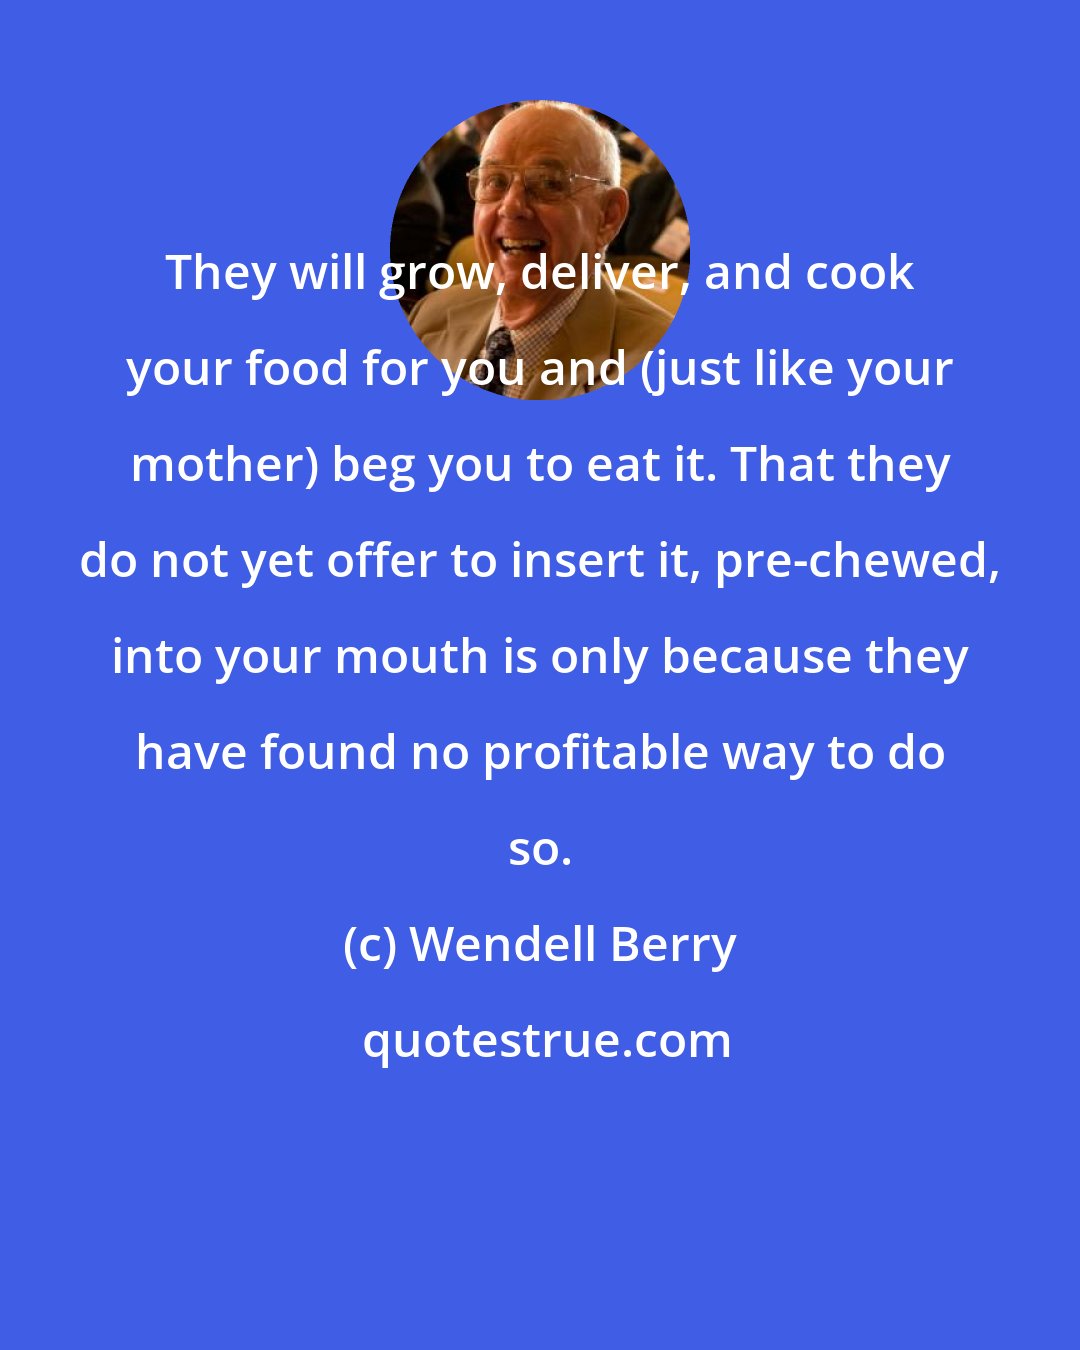 Wendell Berry: They will grow, deliver, and cook your food for you and (just like your mother) beg you to eat it. That they do not yet offer to insert it, pre-chewed, into your mouth is only because they have found no profitable way to do so.